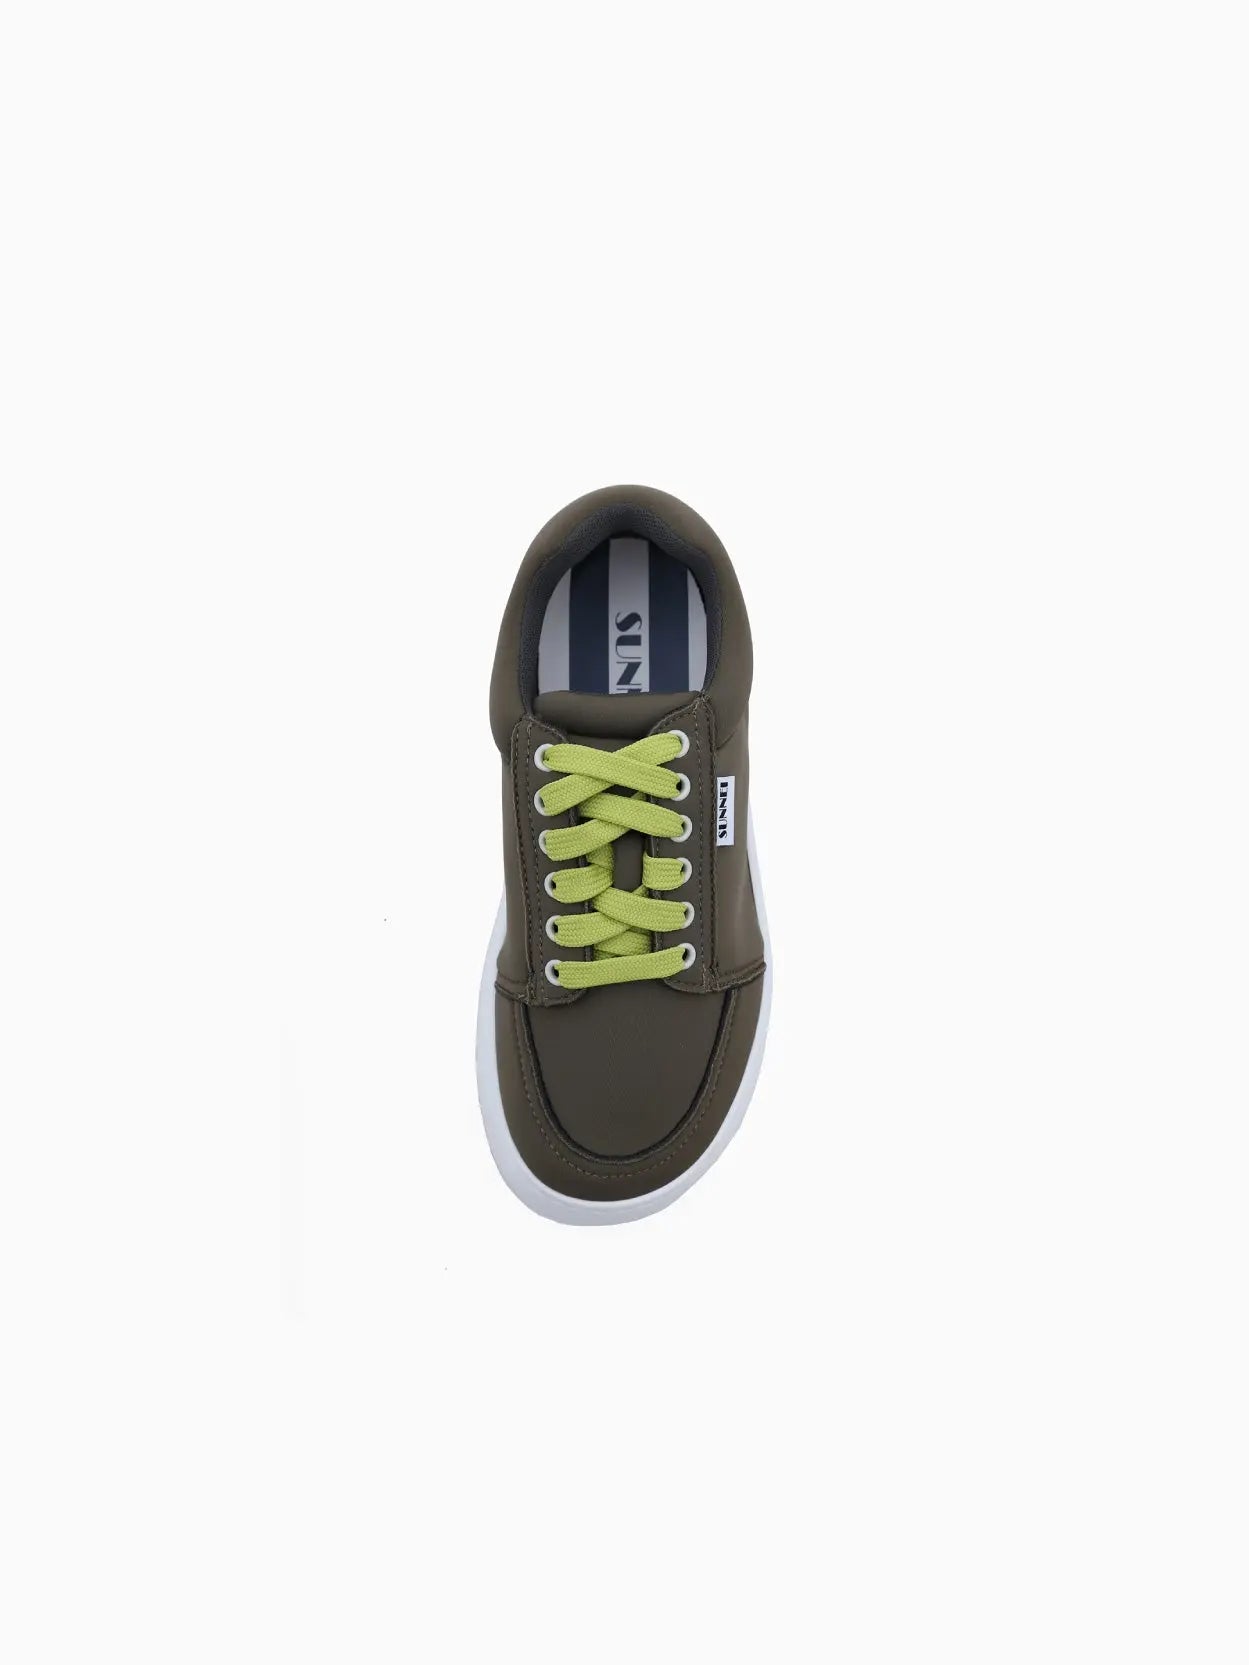 A single olive green sneaker with lime green laces, a thick white midsole, and a brown outsole. The shoe has a small black and white label on the outer side. It is displayed against a plain white background, available exclusively at Bassalstore in Barcelona. This is the Dreamy Shoes Green by Sunnei.